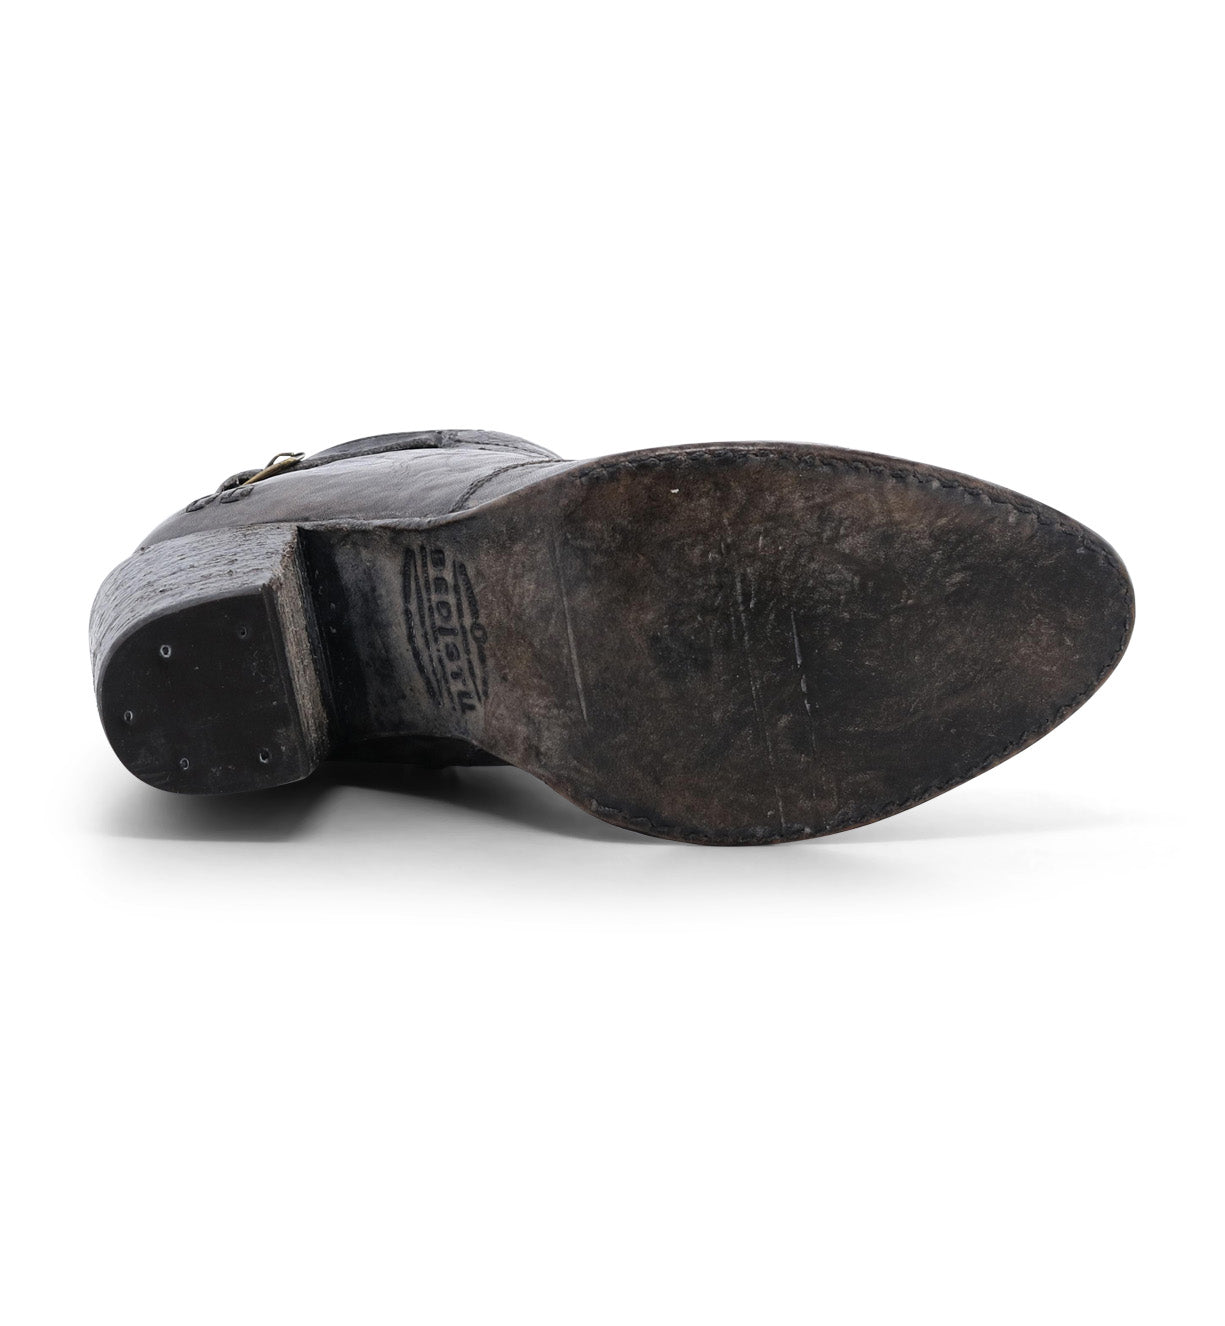 A black leather Isla shoe with a buckle on the side by Bed Stu.